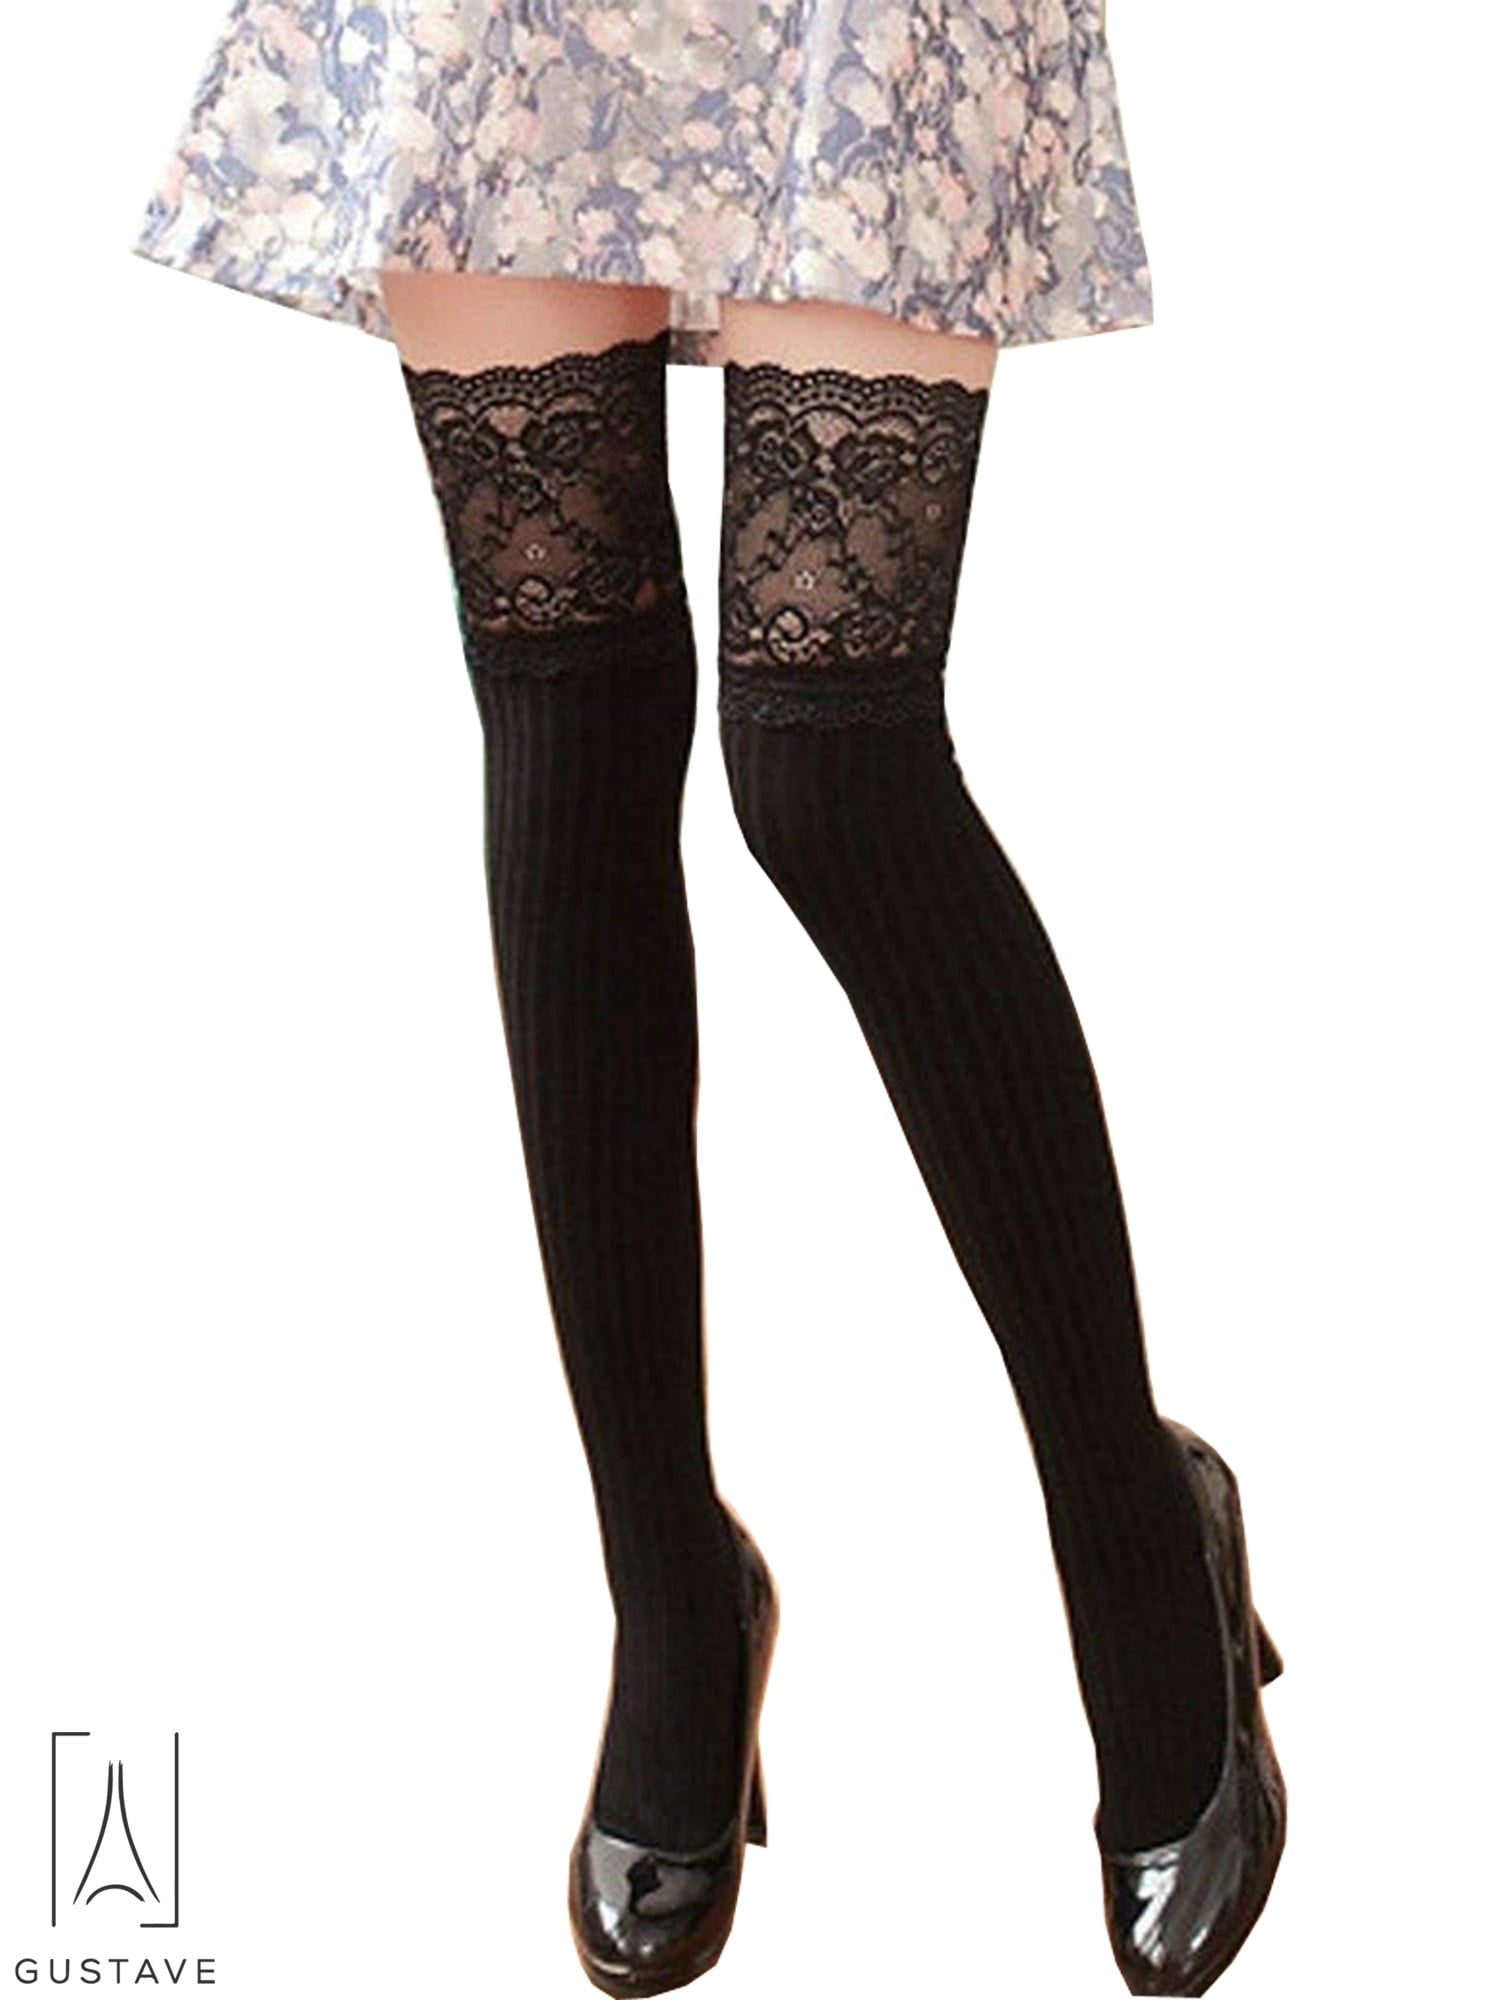 Thigh High Stockings Over Knee Knit Long Boot Stockings Cotton Leg Warmers 